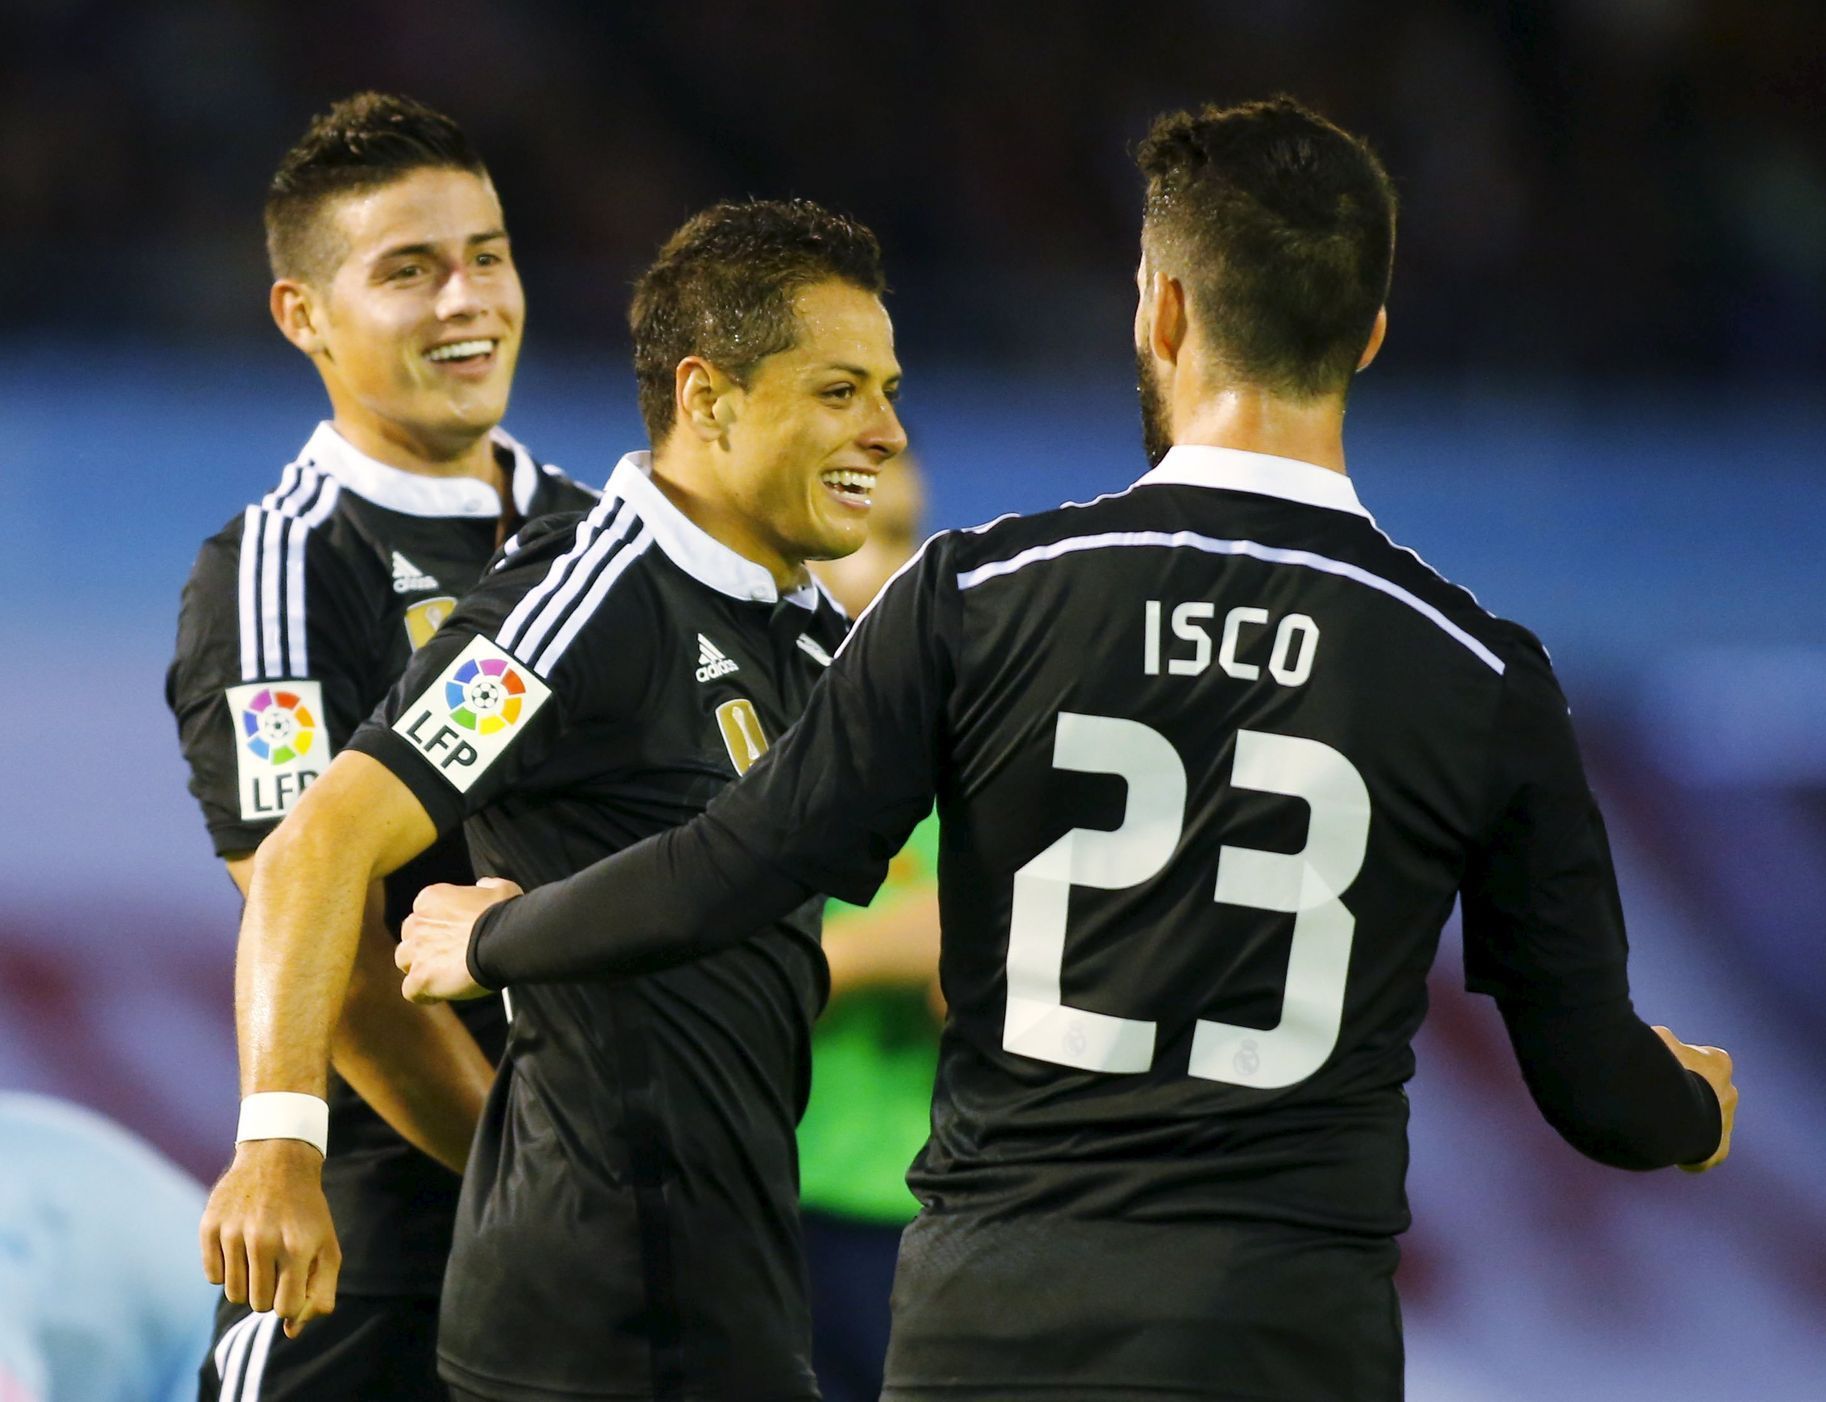 Real Madrid's James celebrates his goal against Celta Vigo with teammates Chicharito and Isco during their Spanish first division soccer match at Balaidos stadium in Vigo